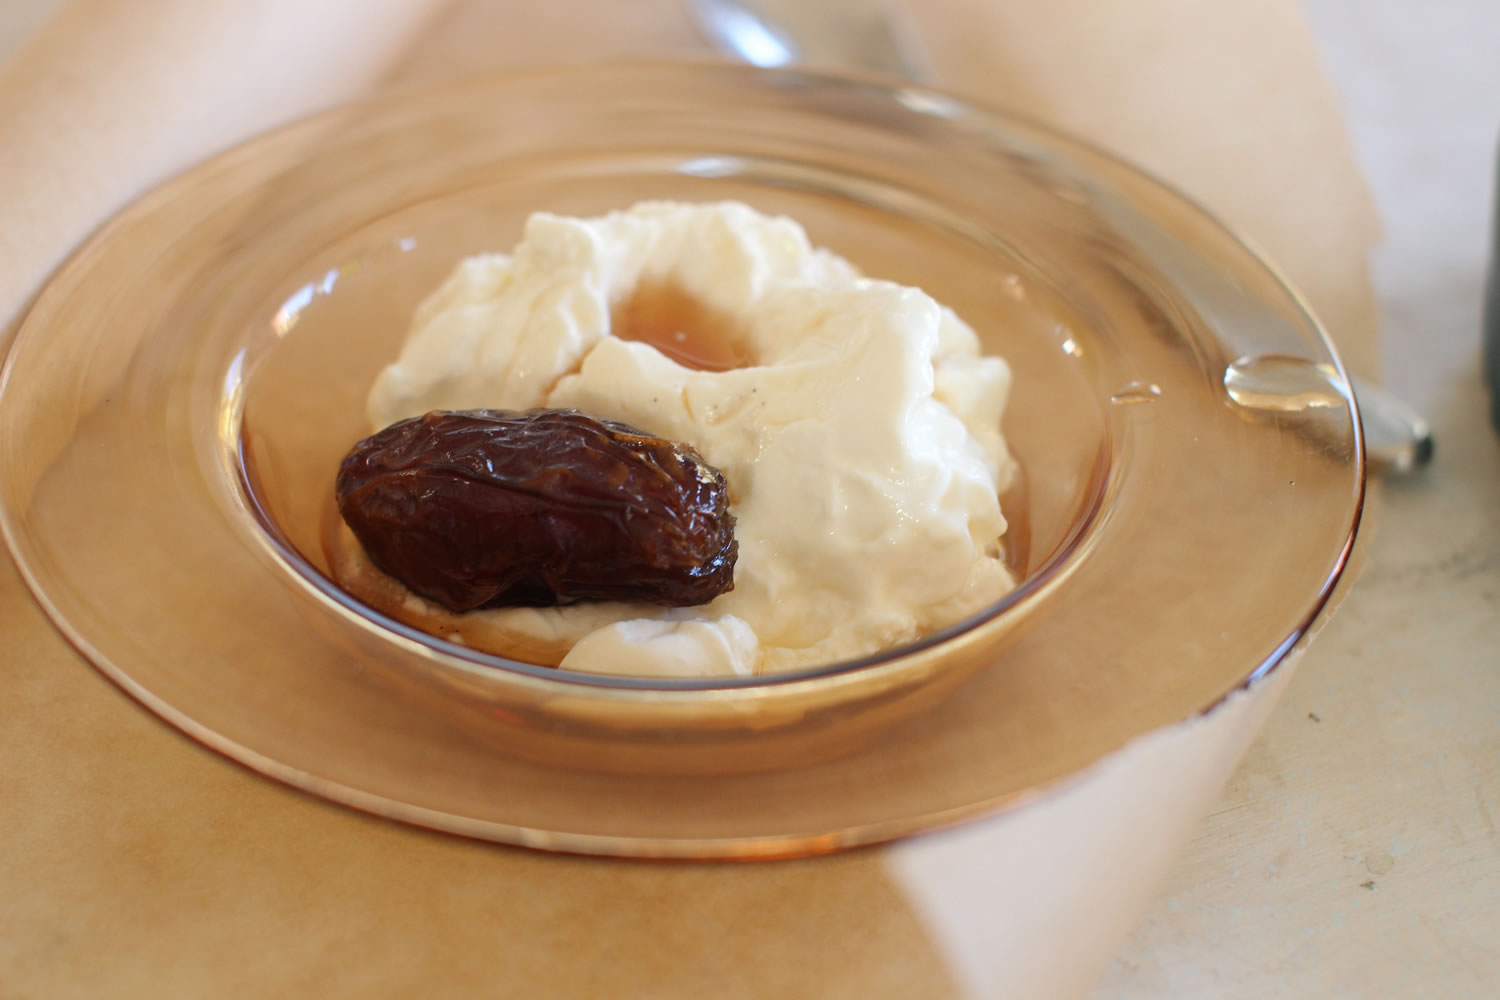 Madeira-marinated dates can top Greek yogurt or be eaten as a from-the-jar treat.